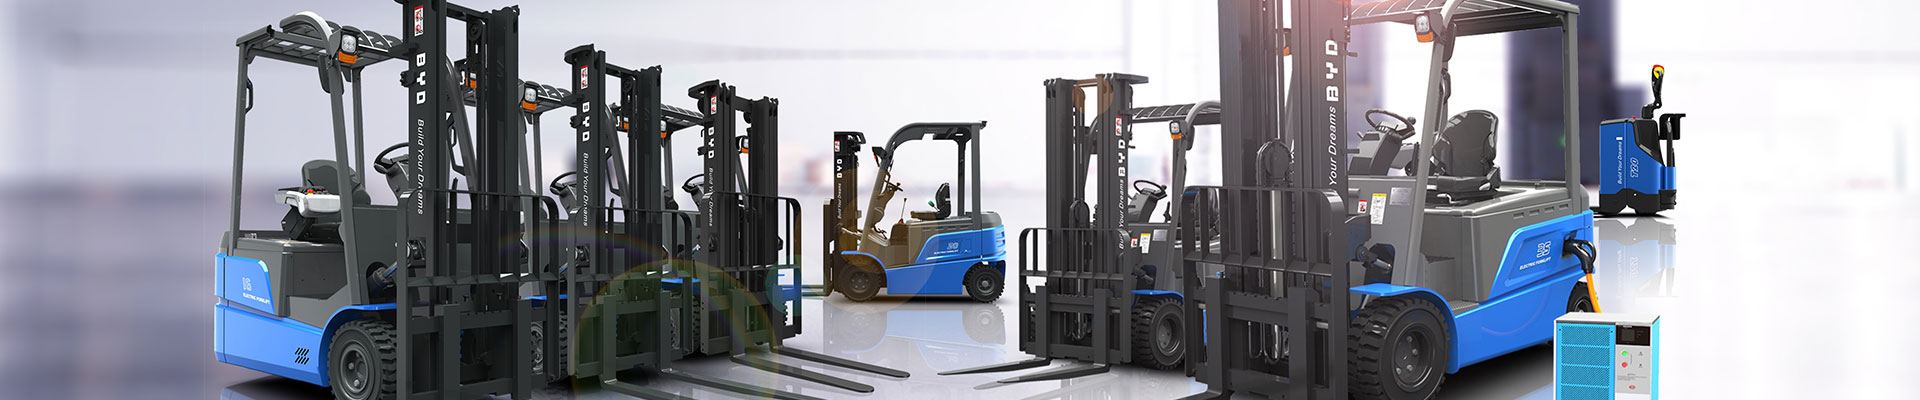 Series of Electric forklifts